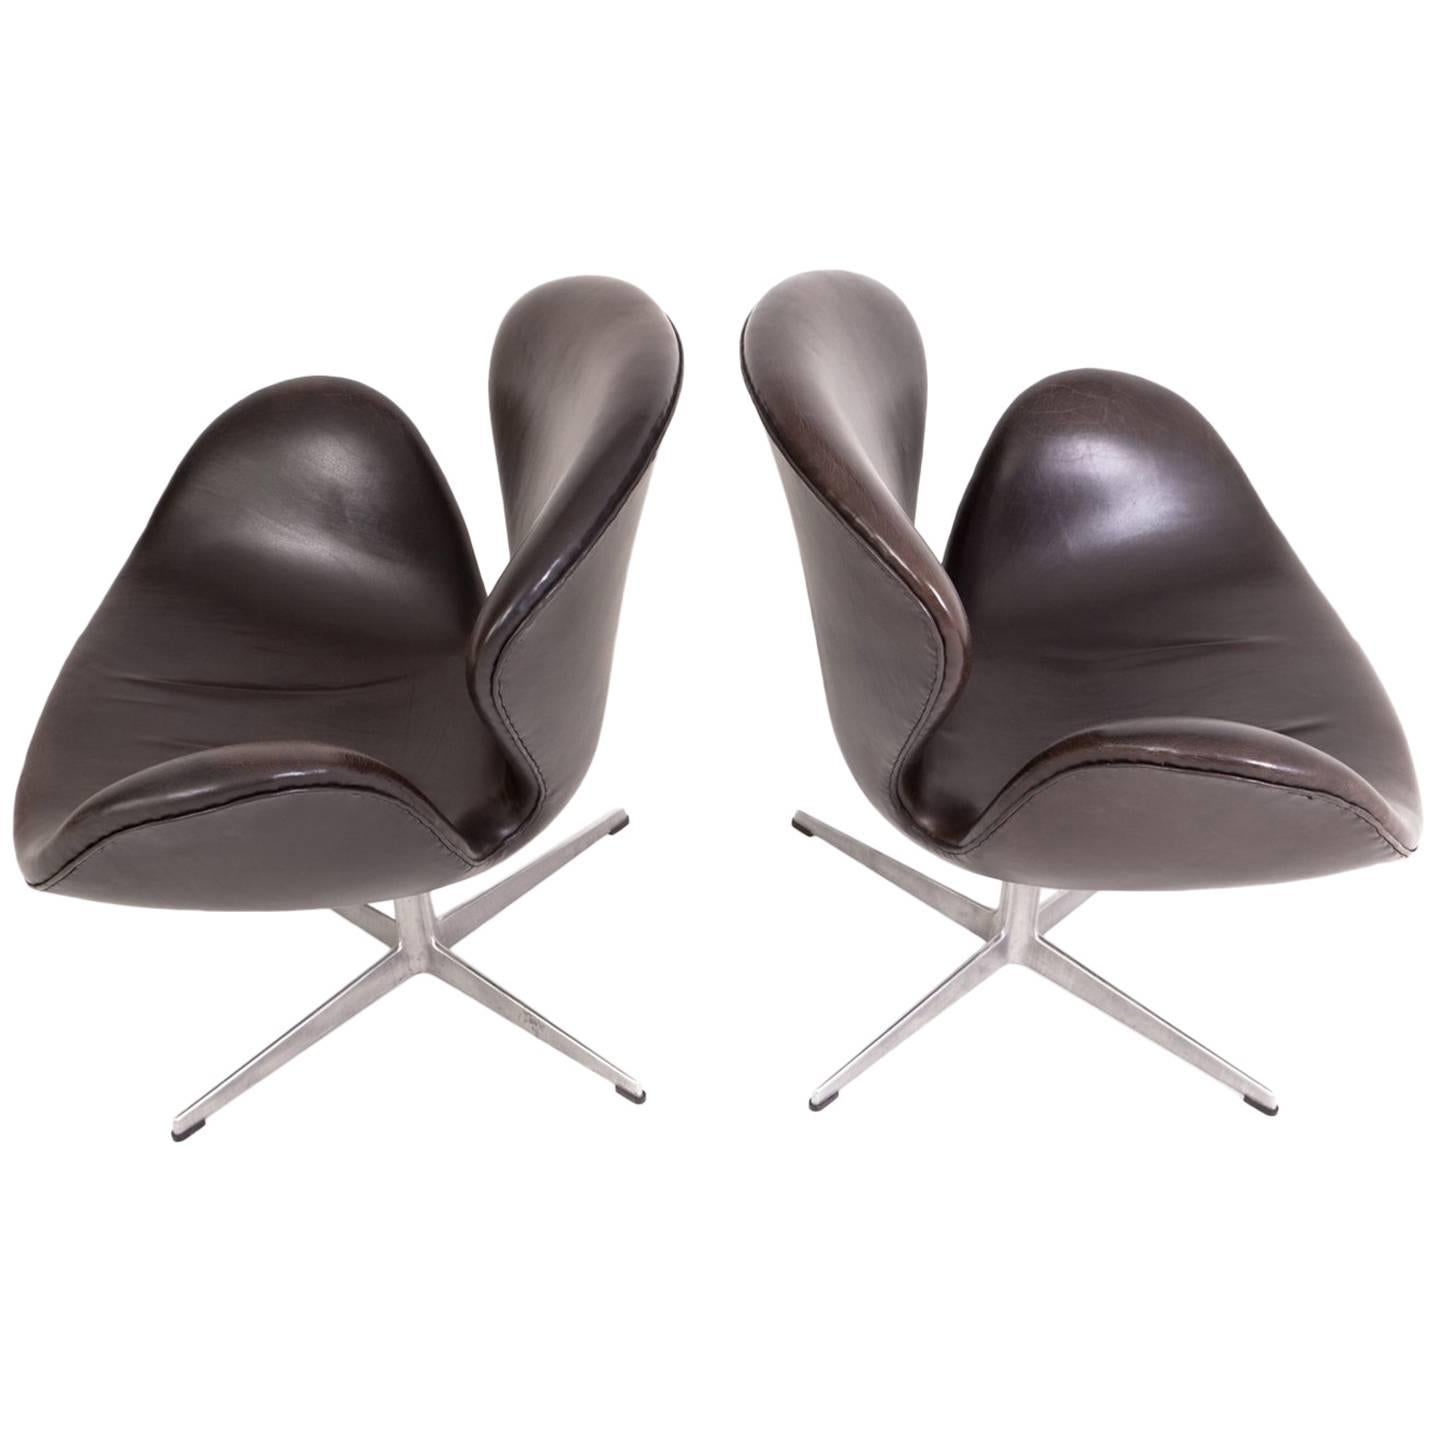 Arne Jacobsen Pair of Swan Chairs For Sale